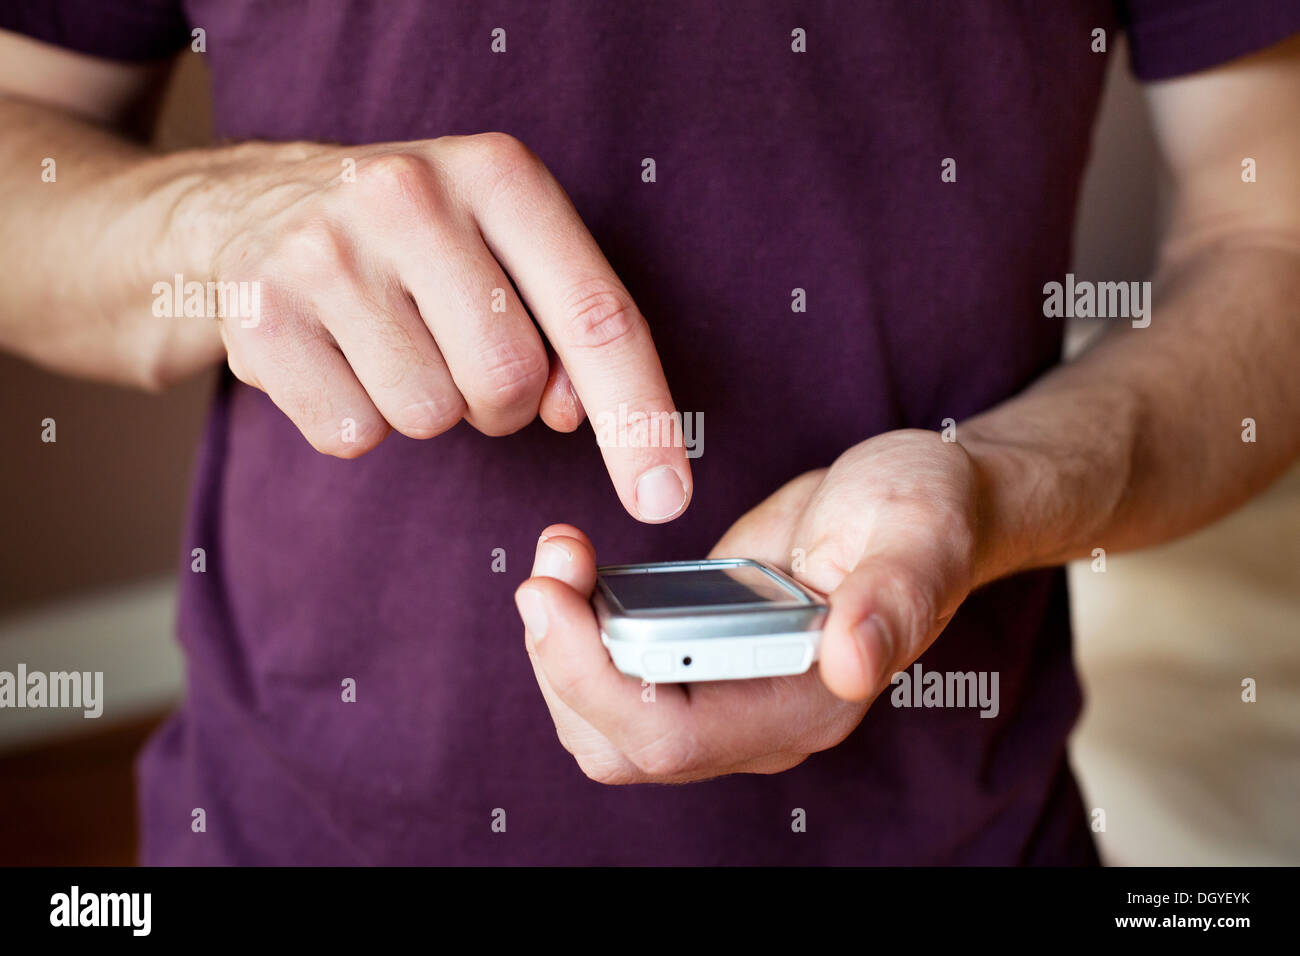 Man with smartphone Banque D'Images